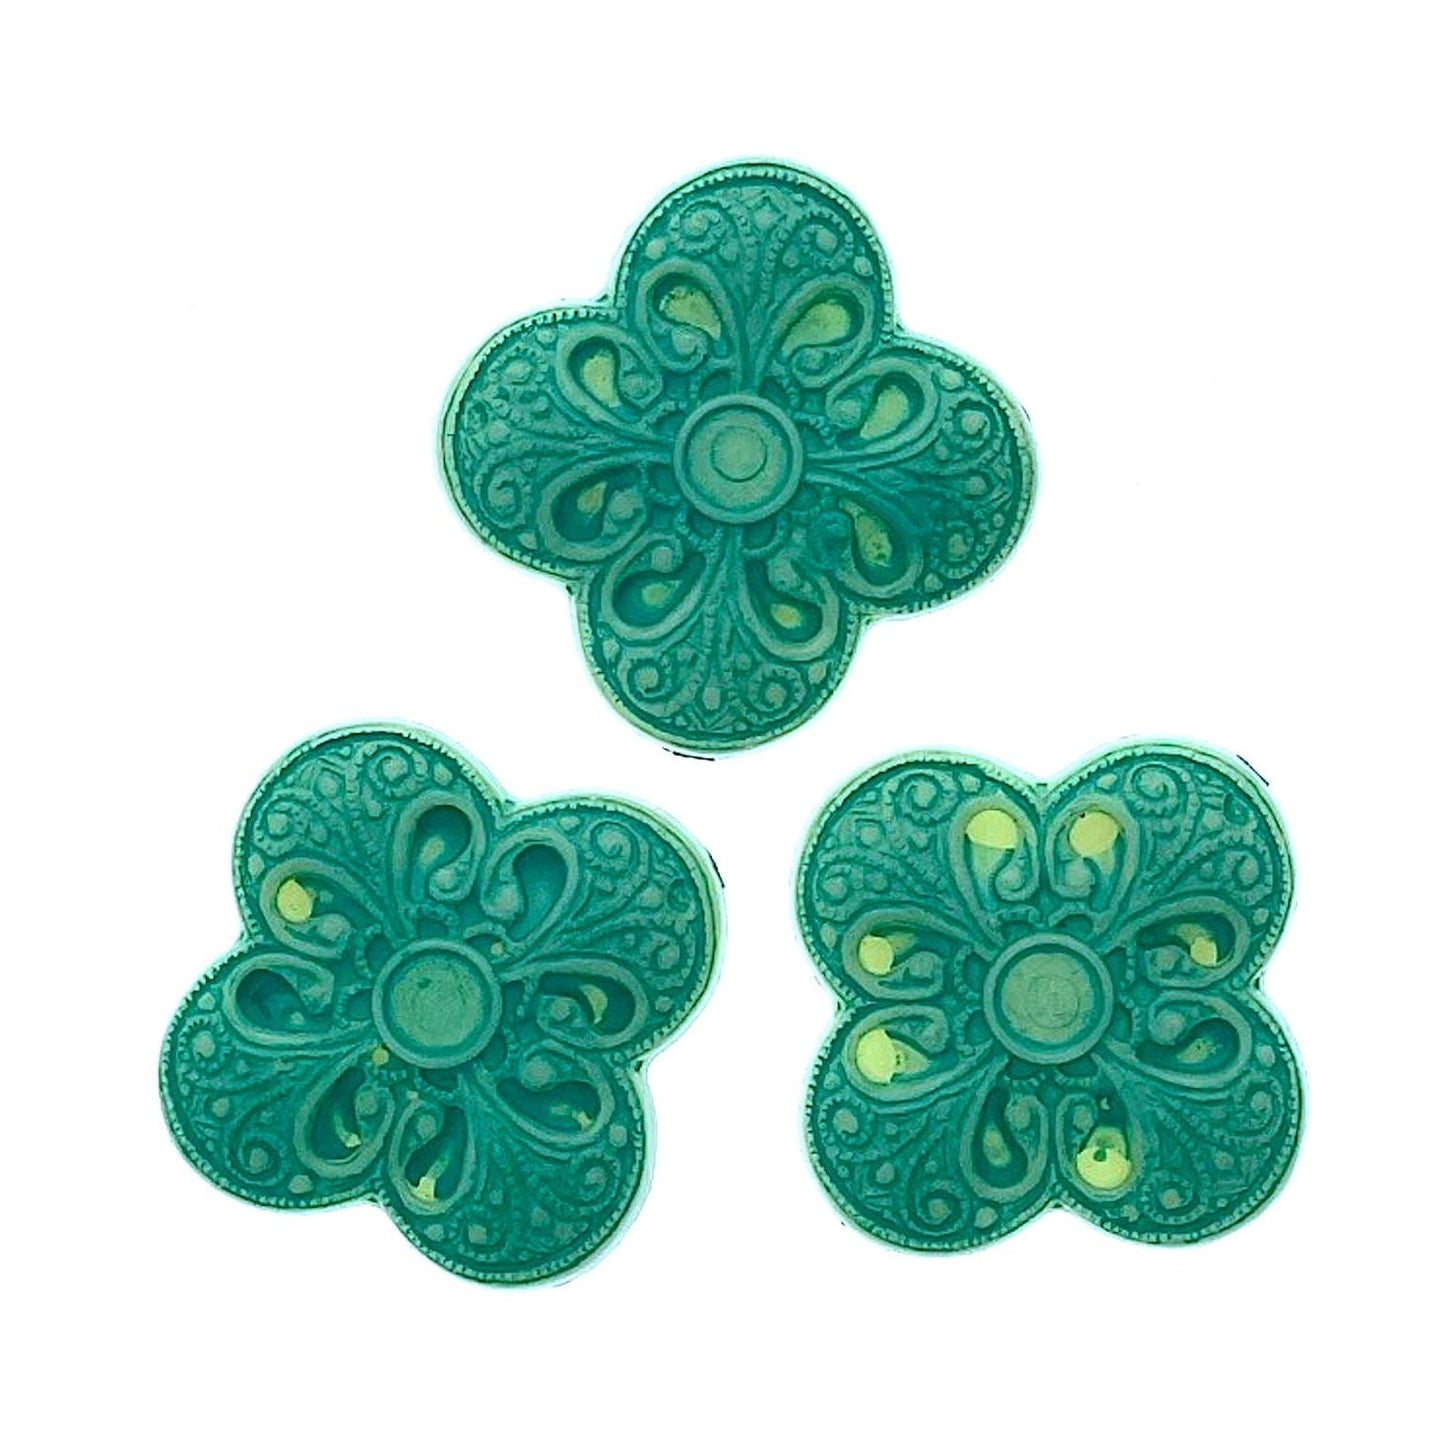 30mm Quatrefoil Cabochon, Green Turquoise Patina, for buttons and earrings, pack of 4